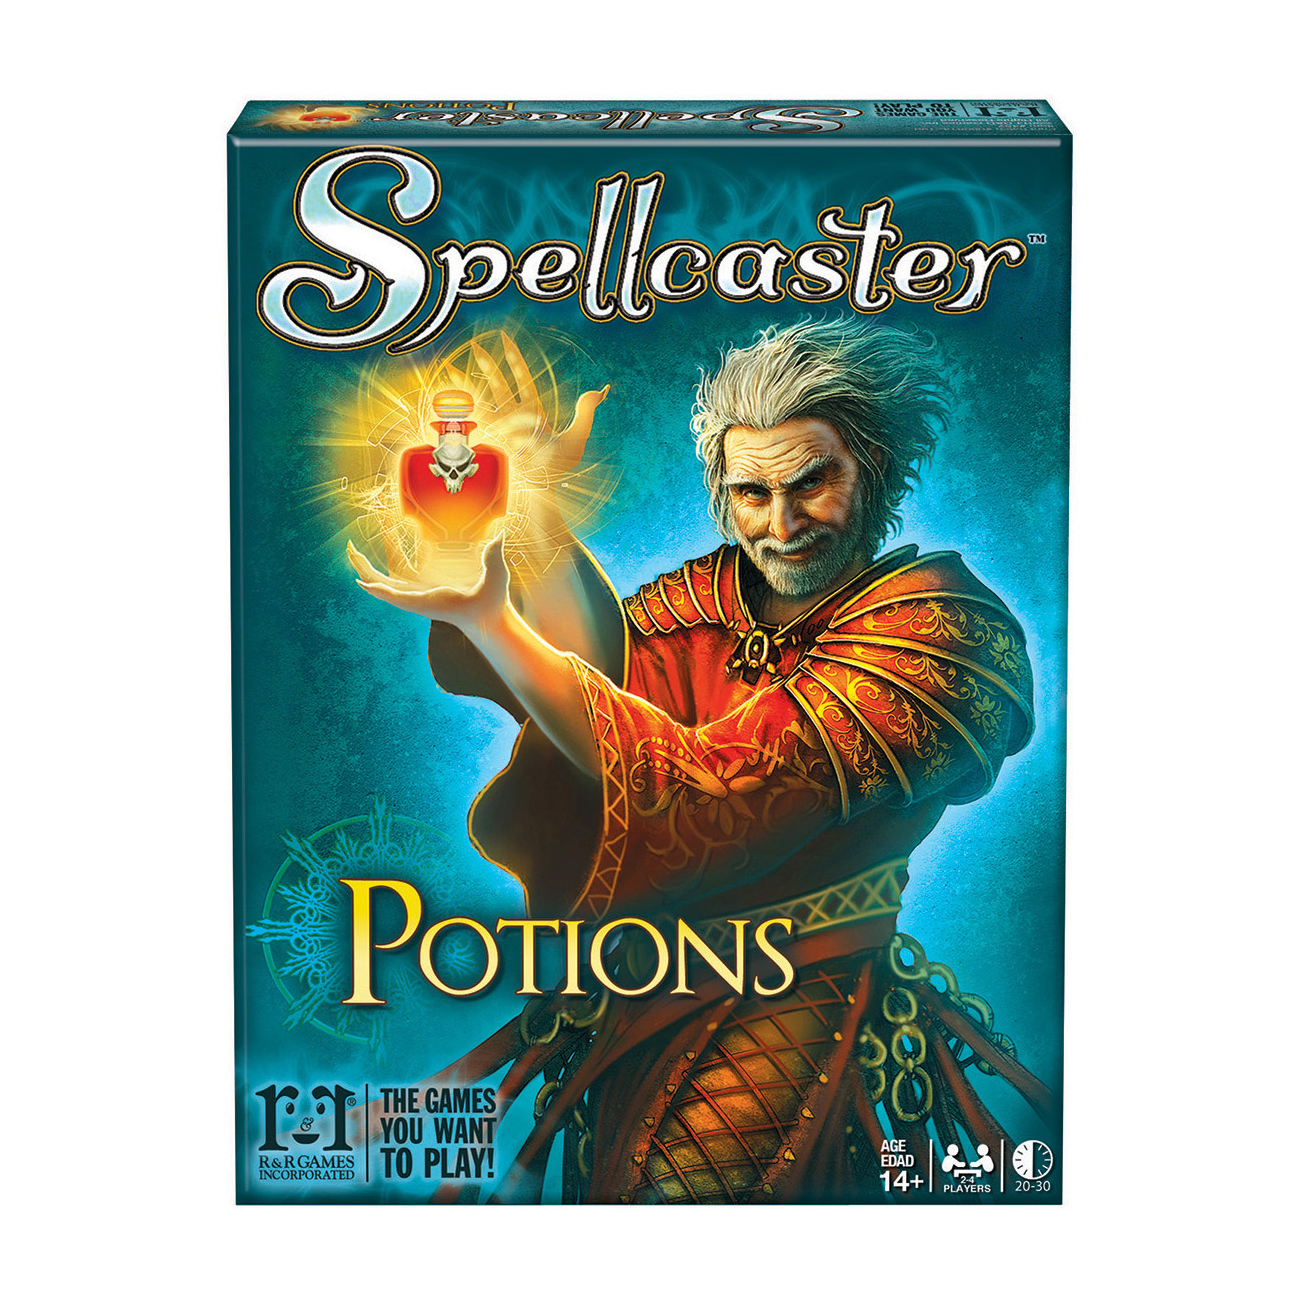 R & R Games Spellcaster Potions